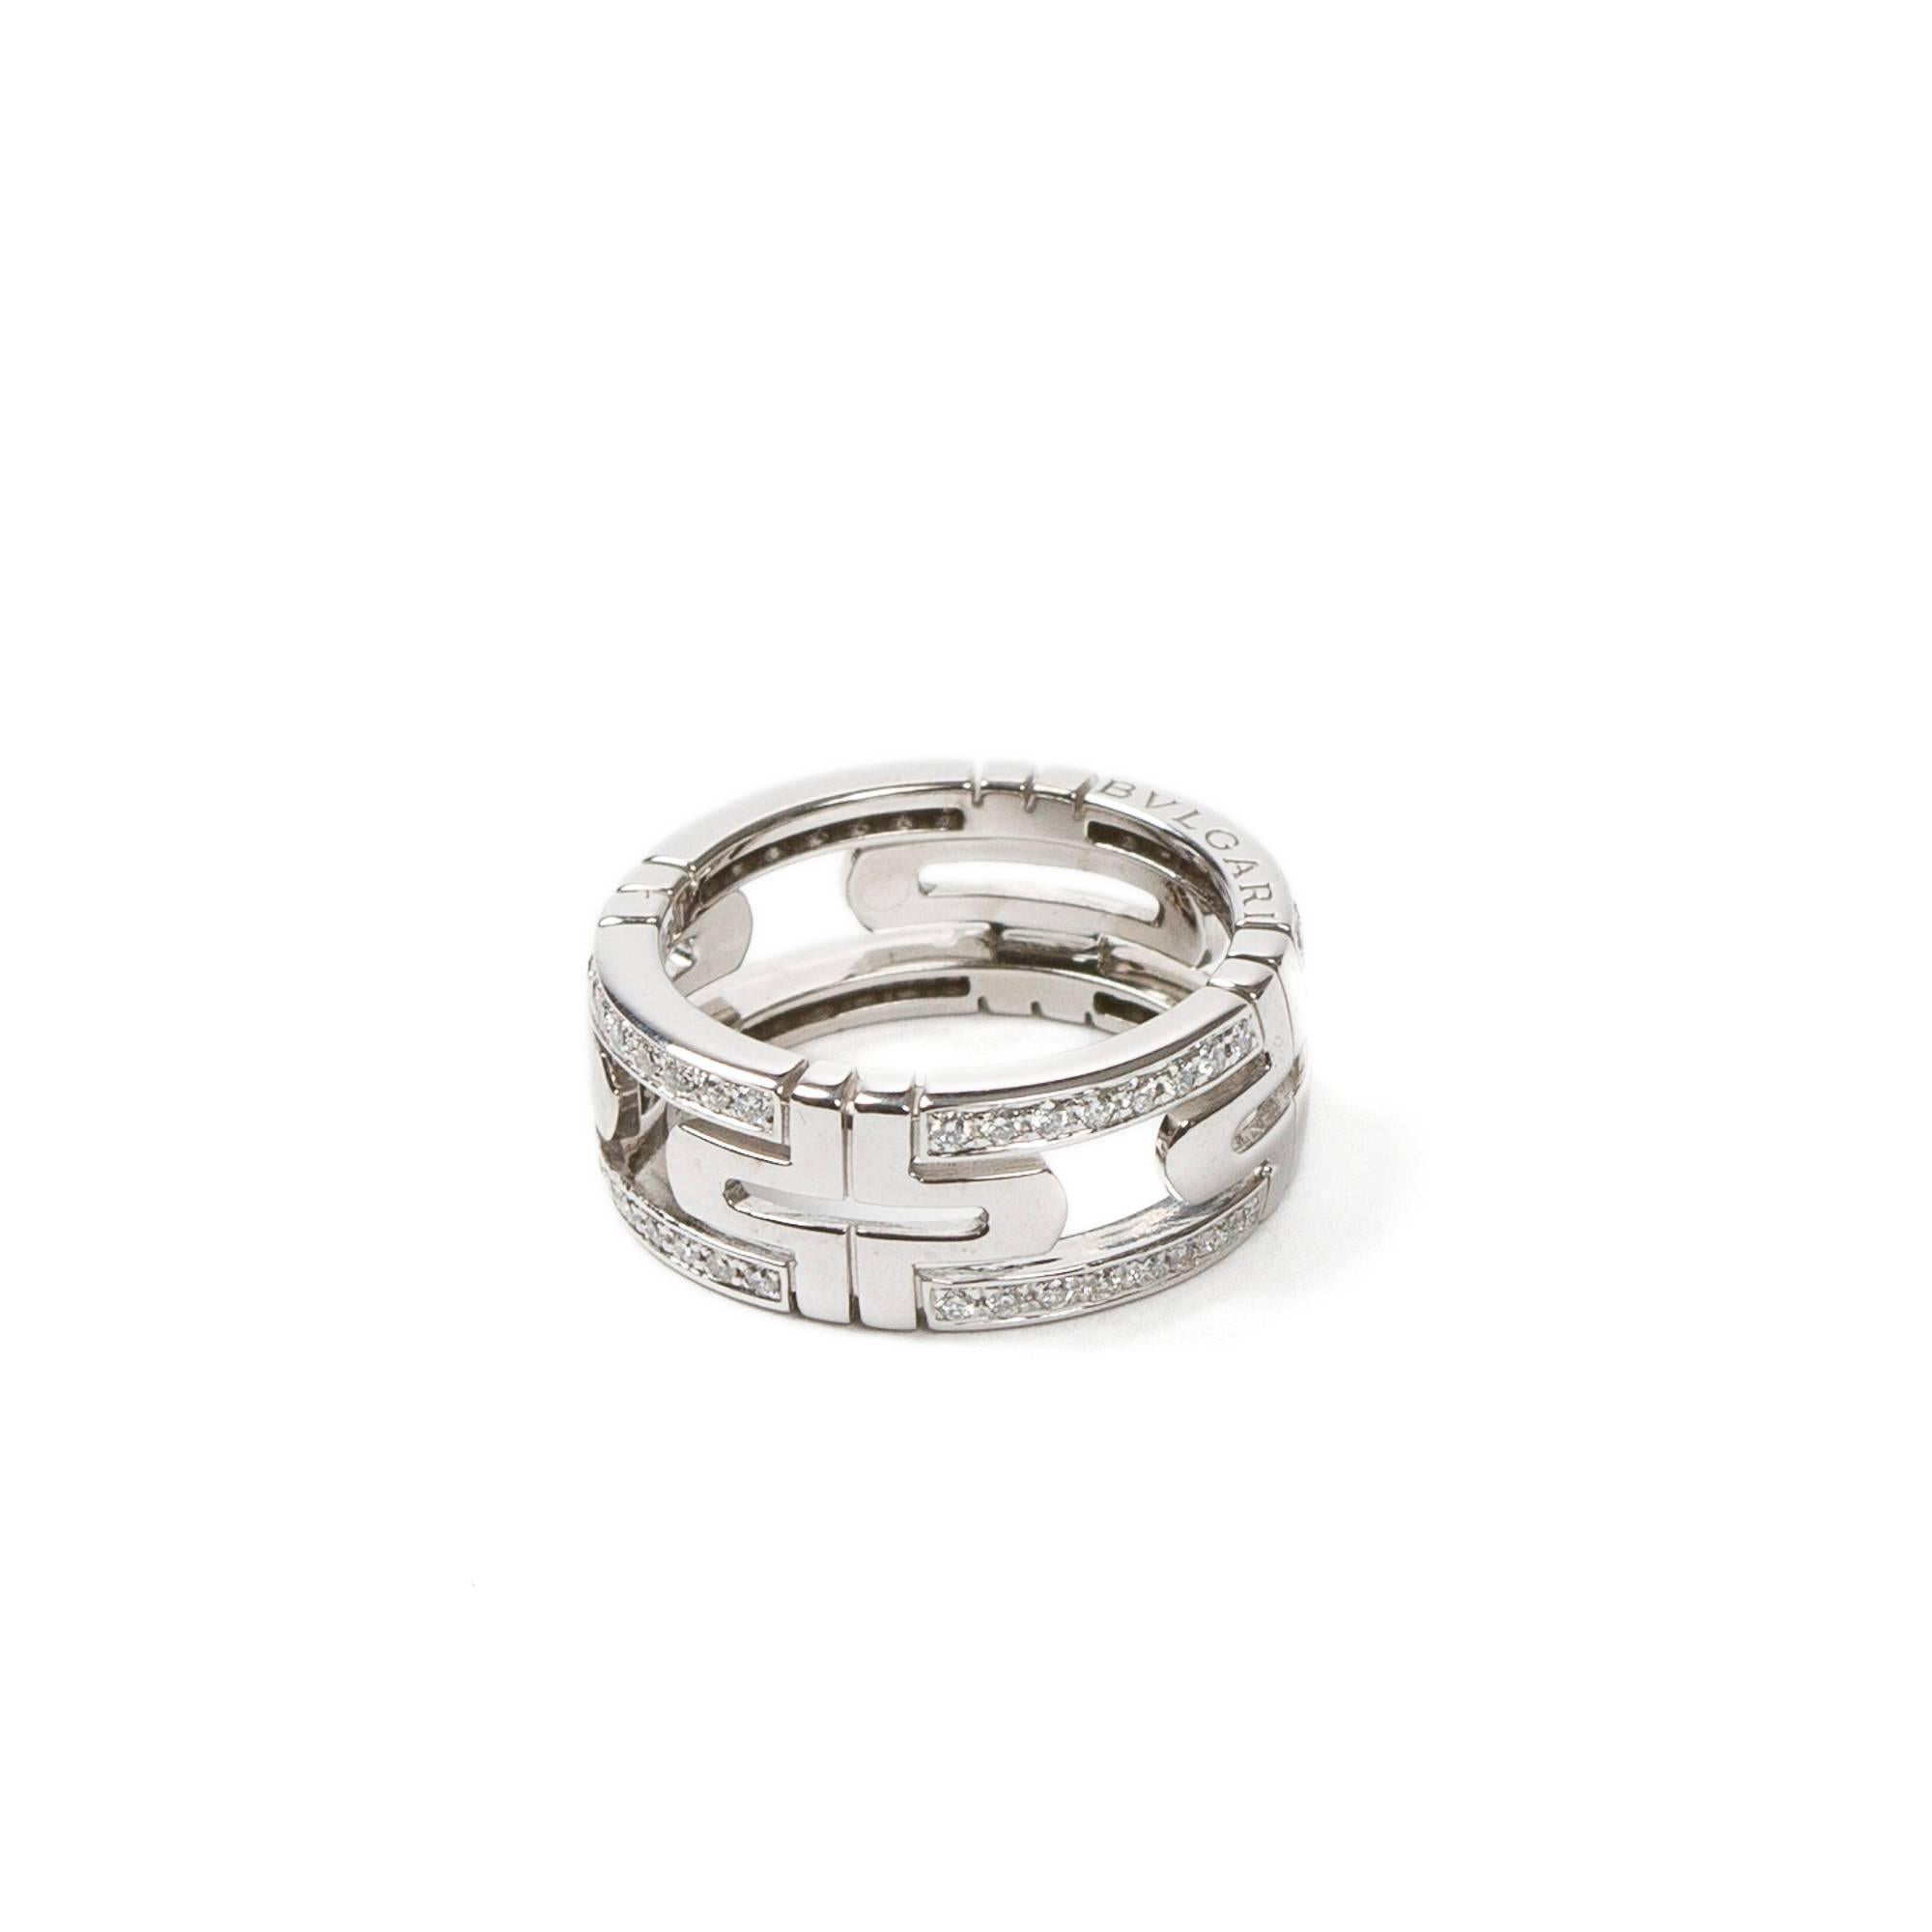 Parentesi Ring in 750 white gold with diamonds. Hallmarks inside of the ring 